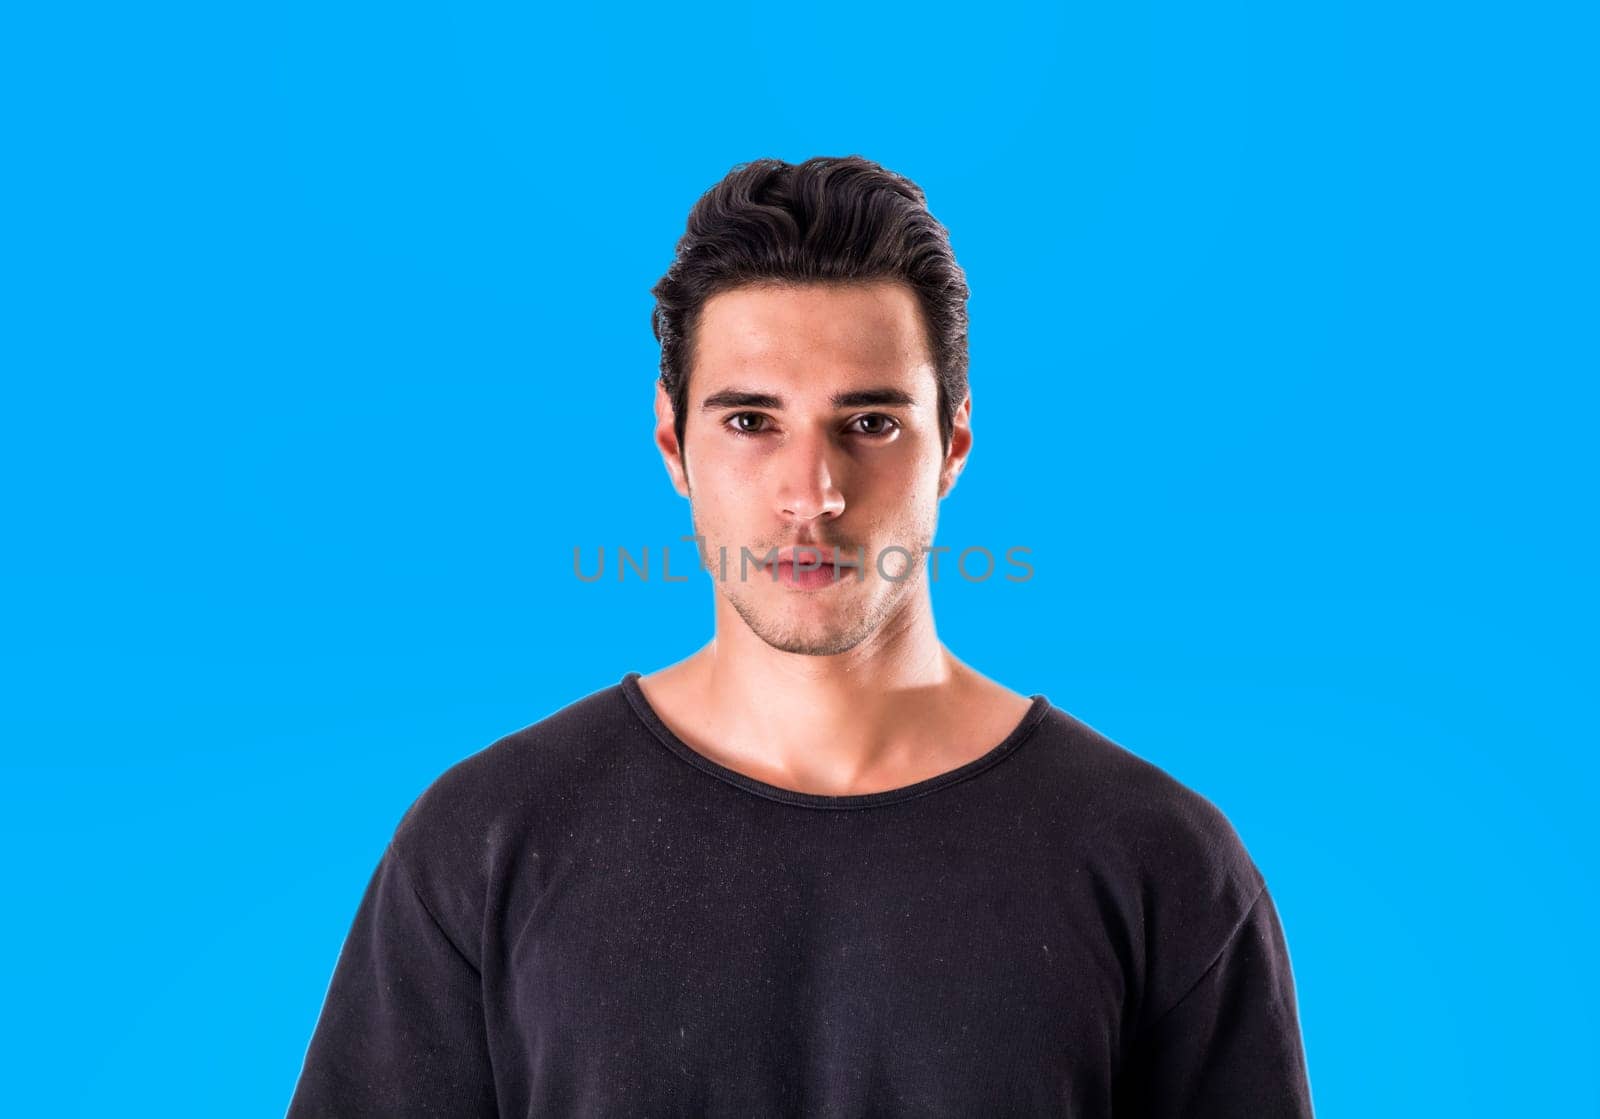 A man in a black shirt posing for a picture